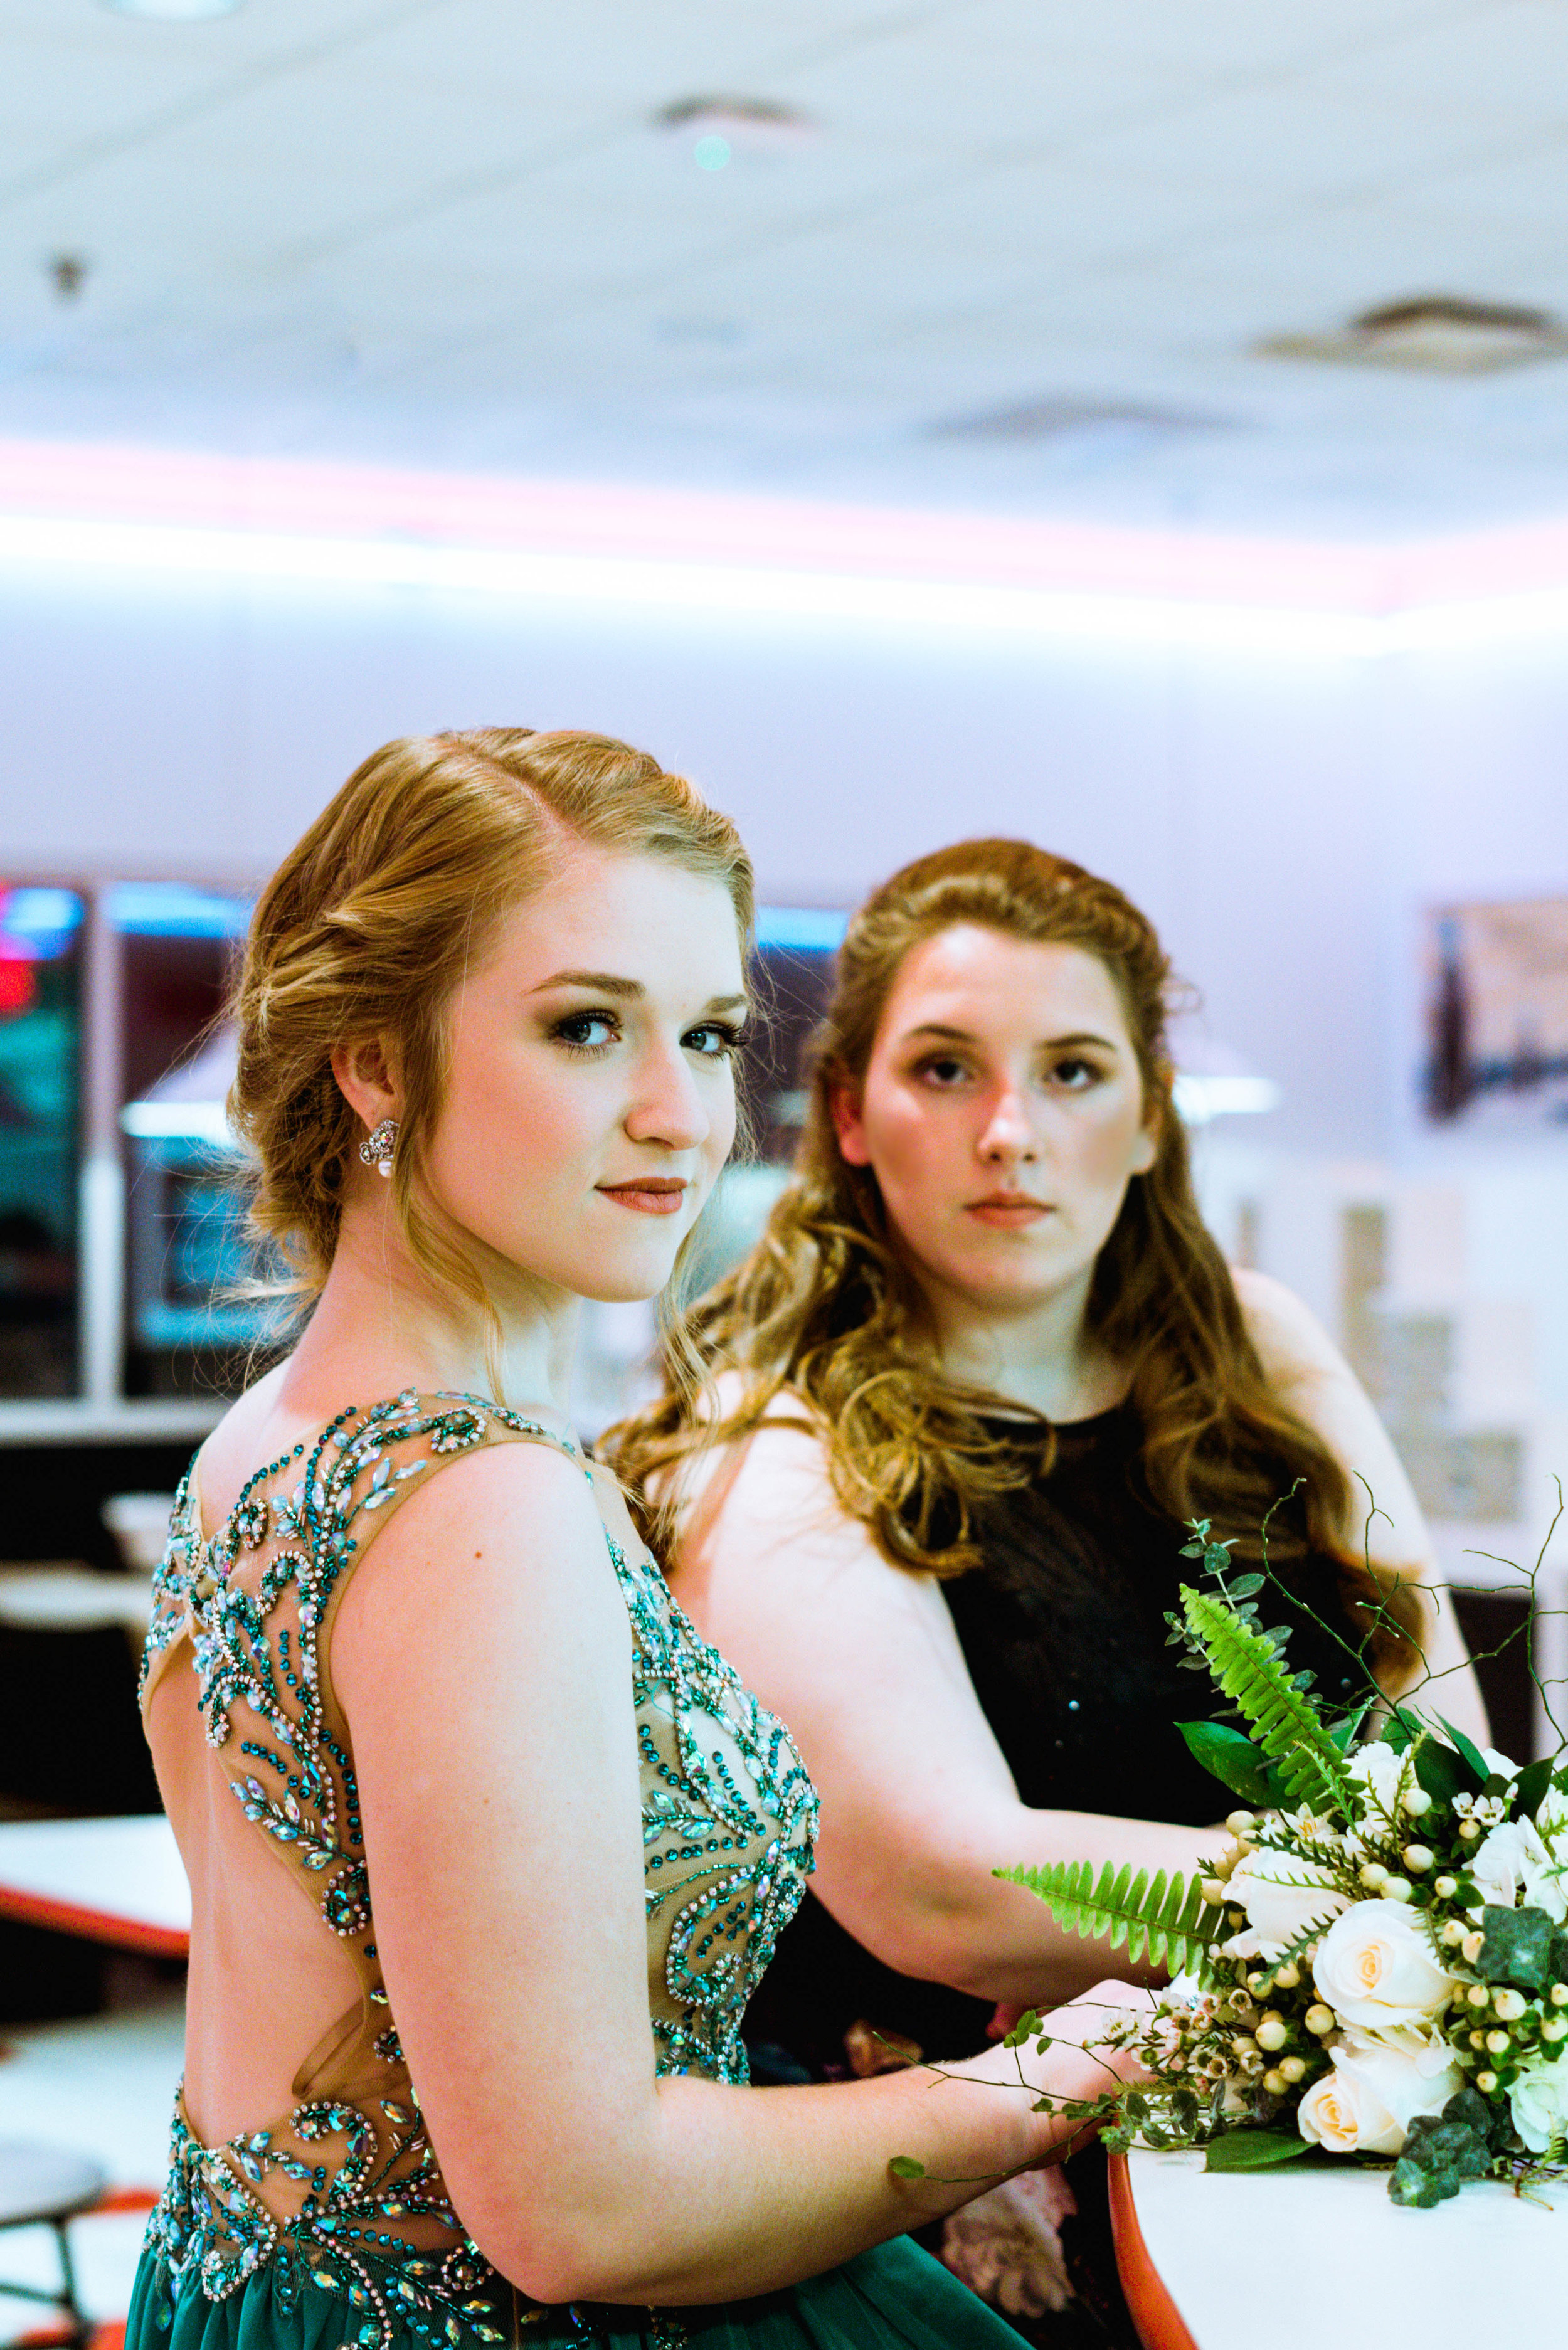 Retro Diner Prom Fashion Styled Session